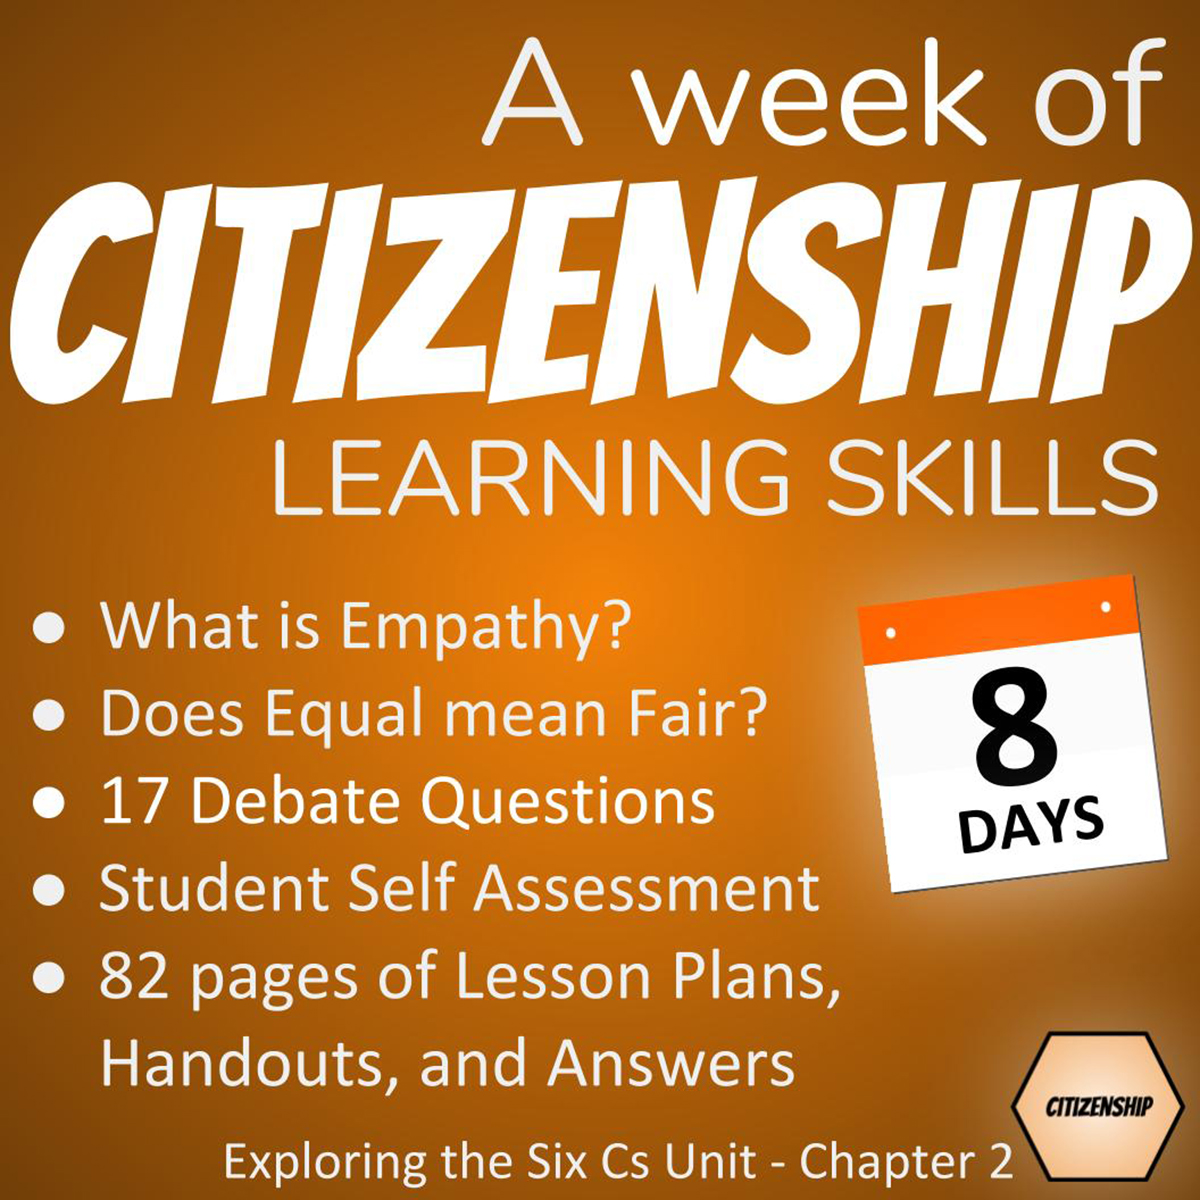 Good Citizenship Lesson Plans: A week of citizenship learning skills - 8 days - What is Empathy? Does Equal mean Fair? 17 Debate Questions. Student Self Assessment. 82 pages of Lesson Plans, Handouts and Answers